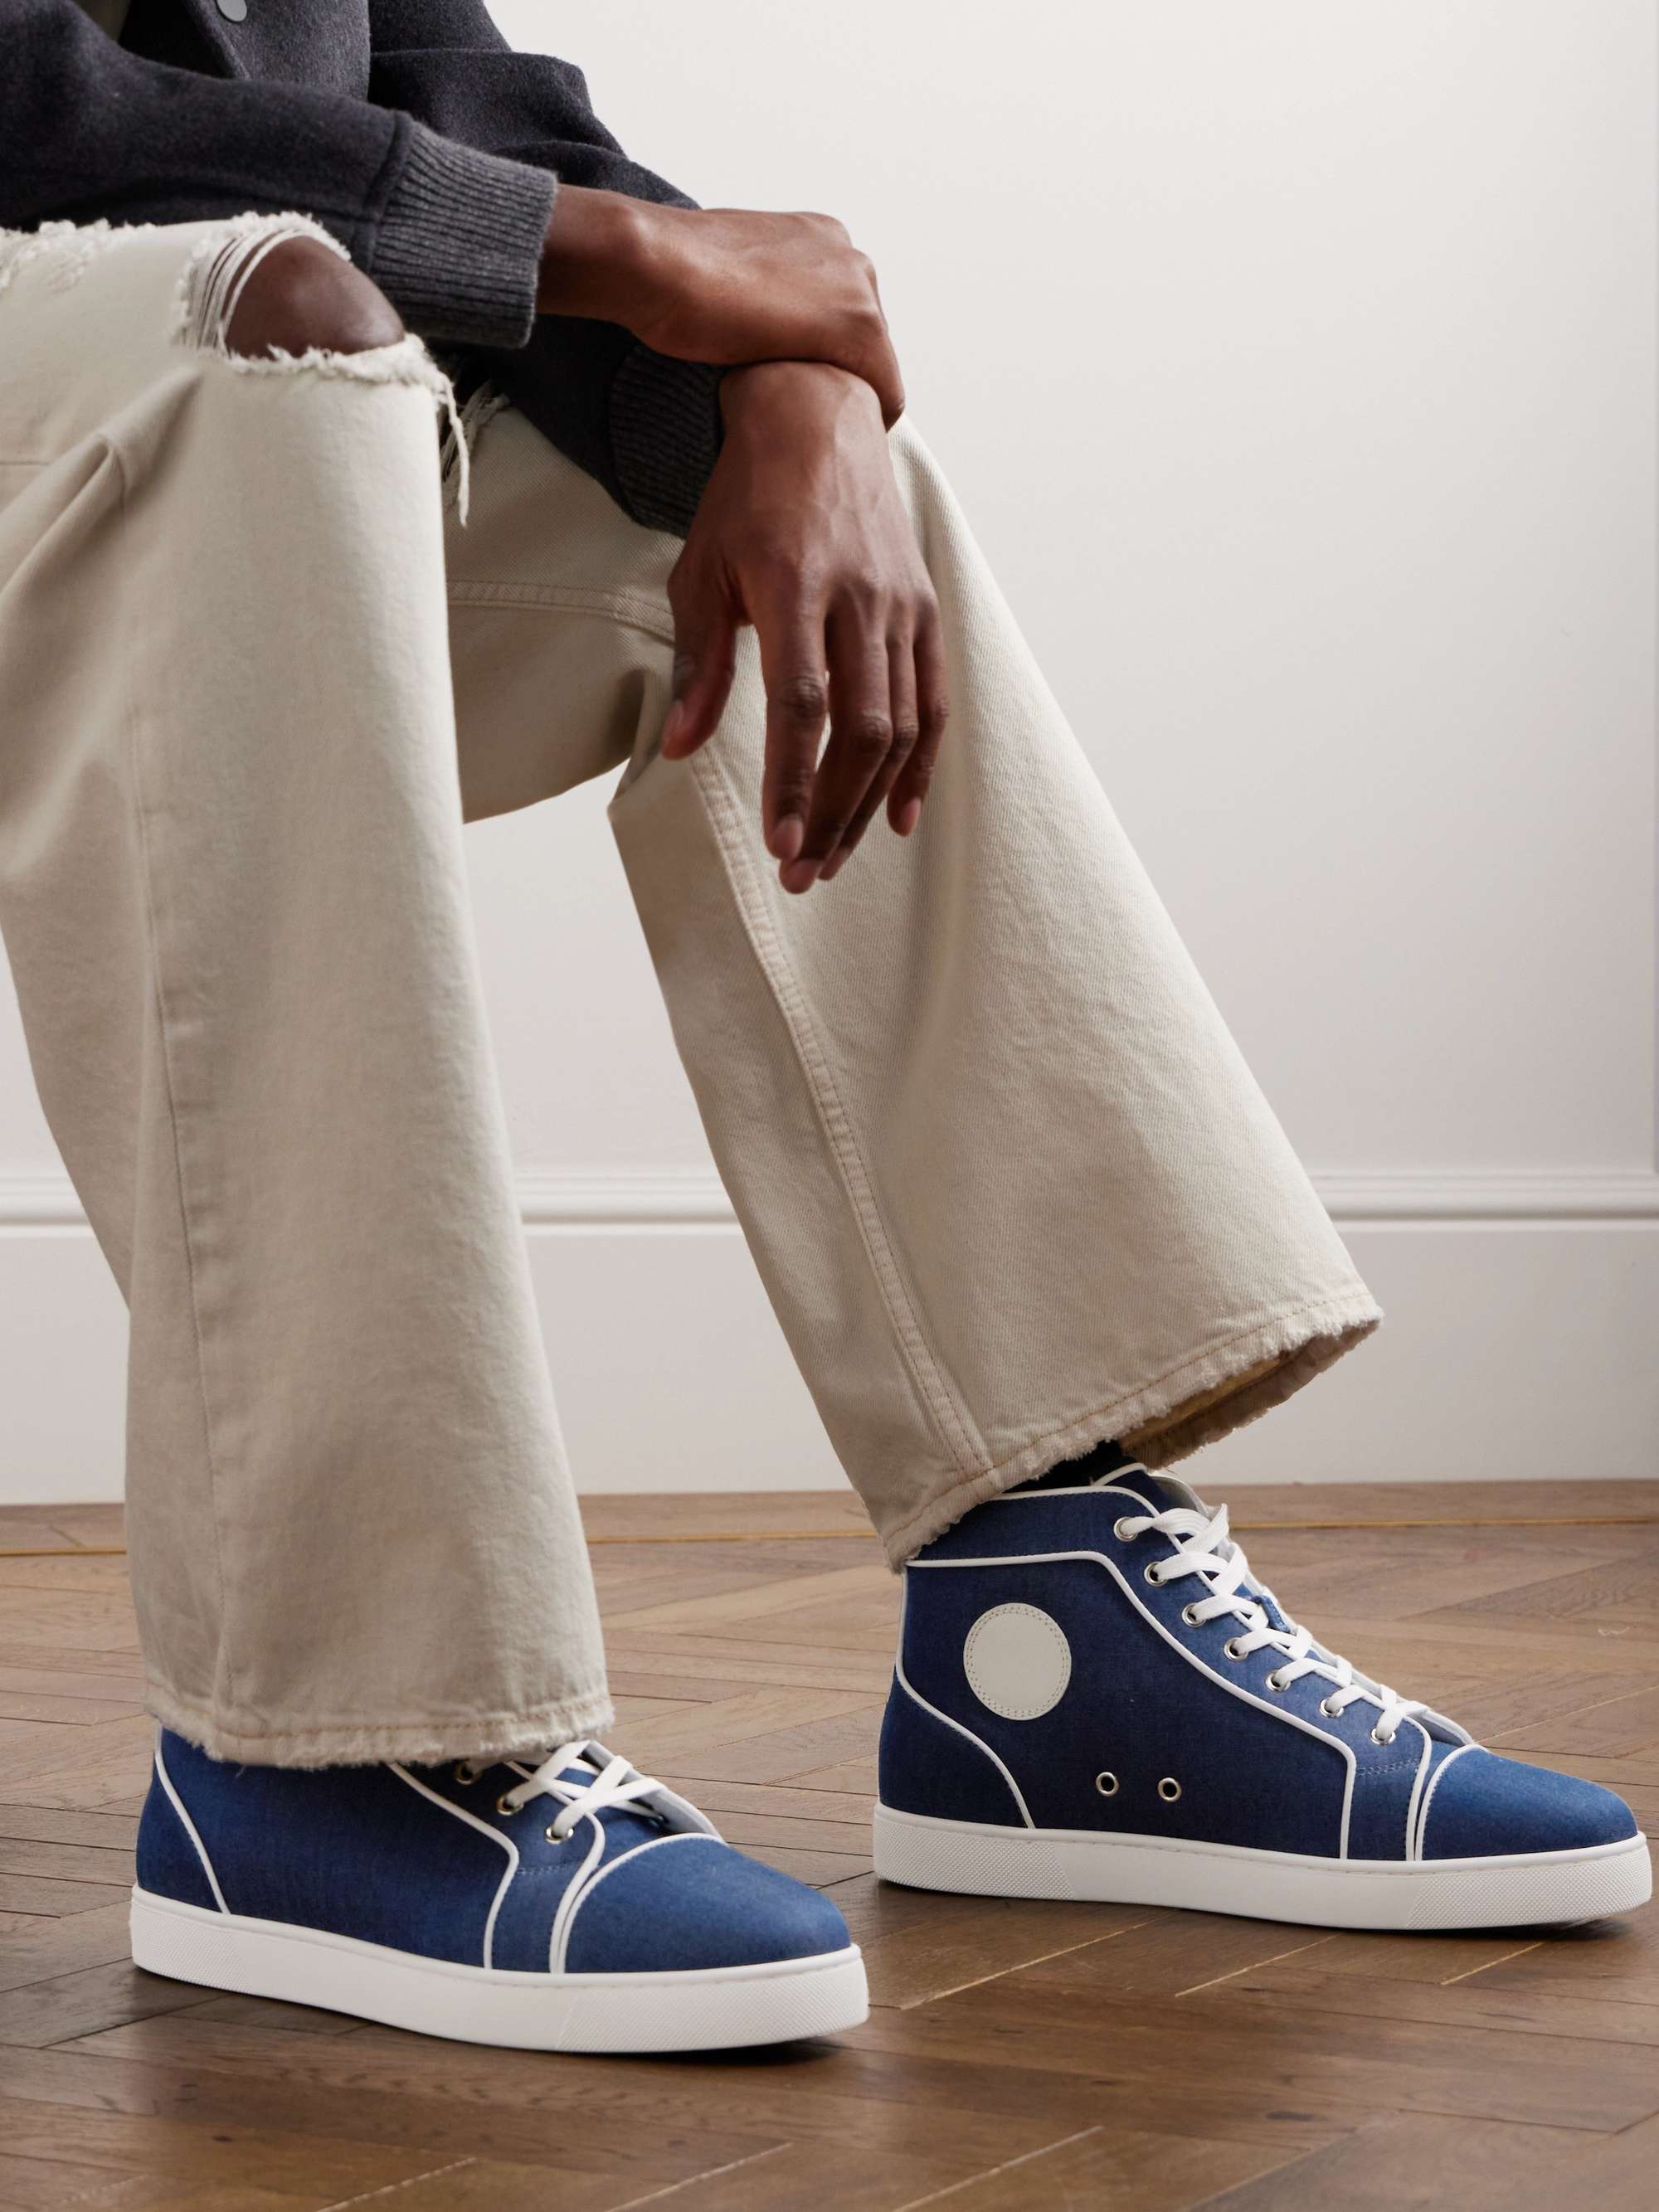 Christian Louboutin logo-embroidered Leather-trimmed Denim High-Top Sneakers - Men - Mid Denim Sneakers - EU 43.5